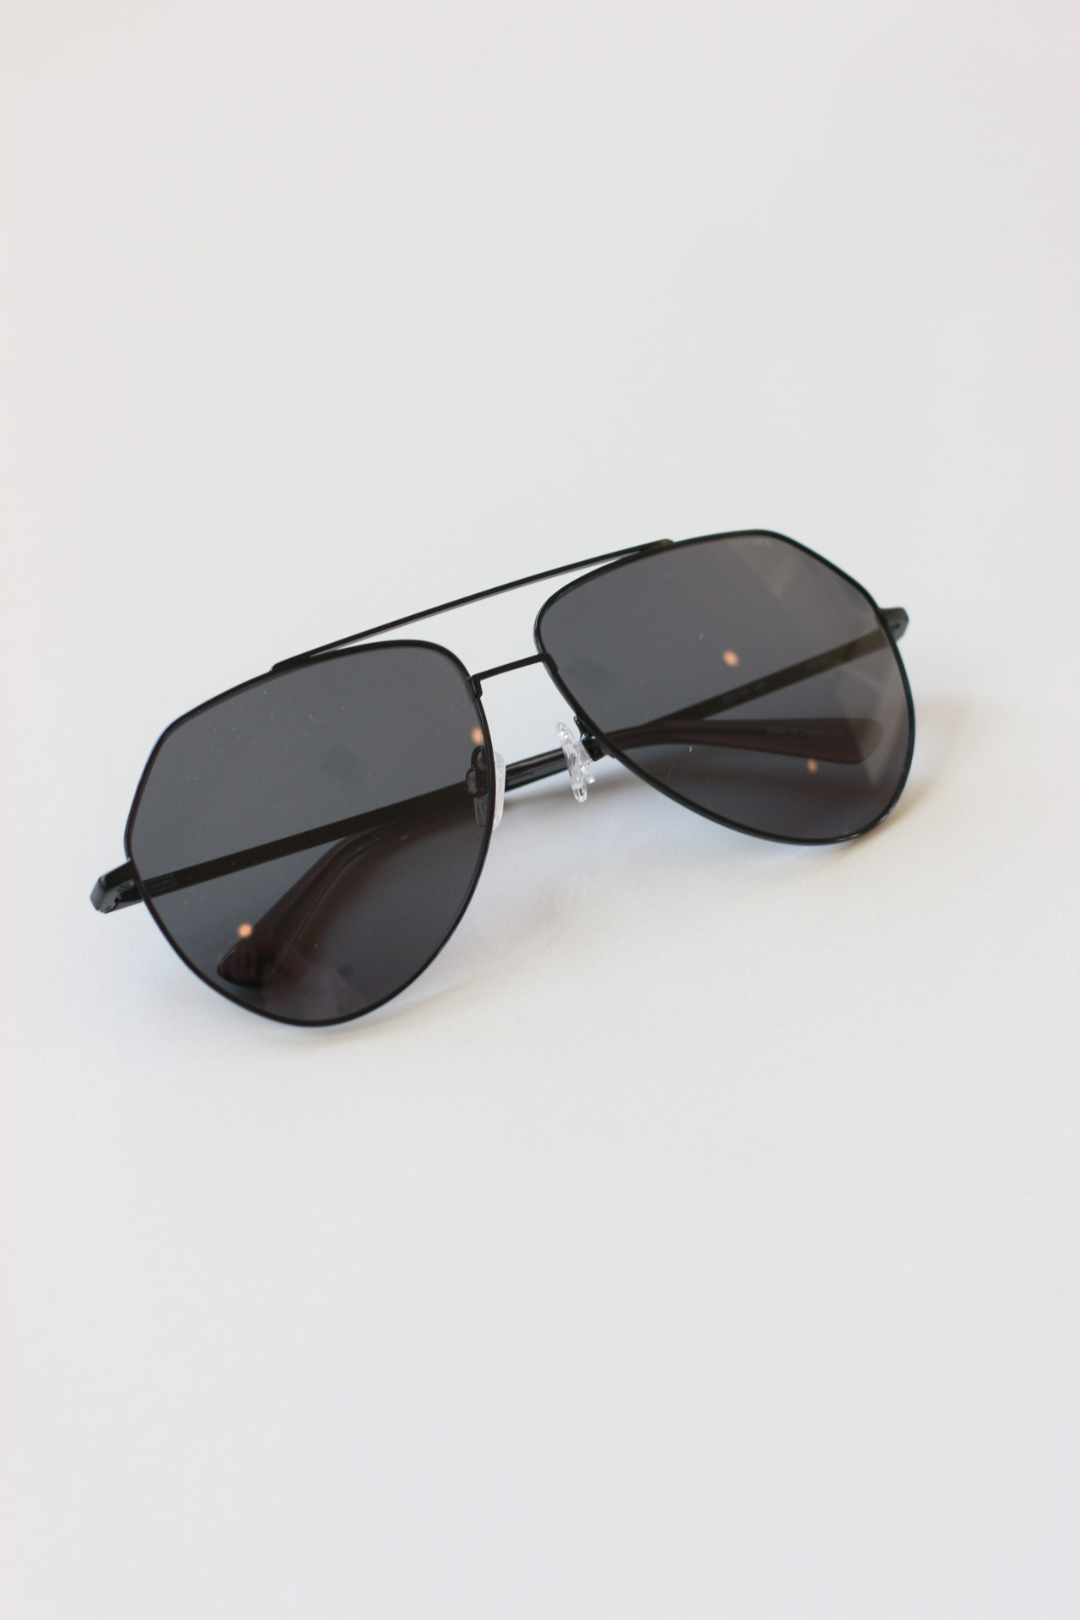 Stylish and sophisticated Harbor Black Aviator Sunglasses. Perfect for fashion-forward individuals. Designed in house with precision and care.